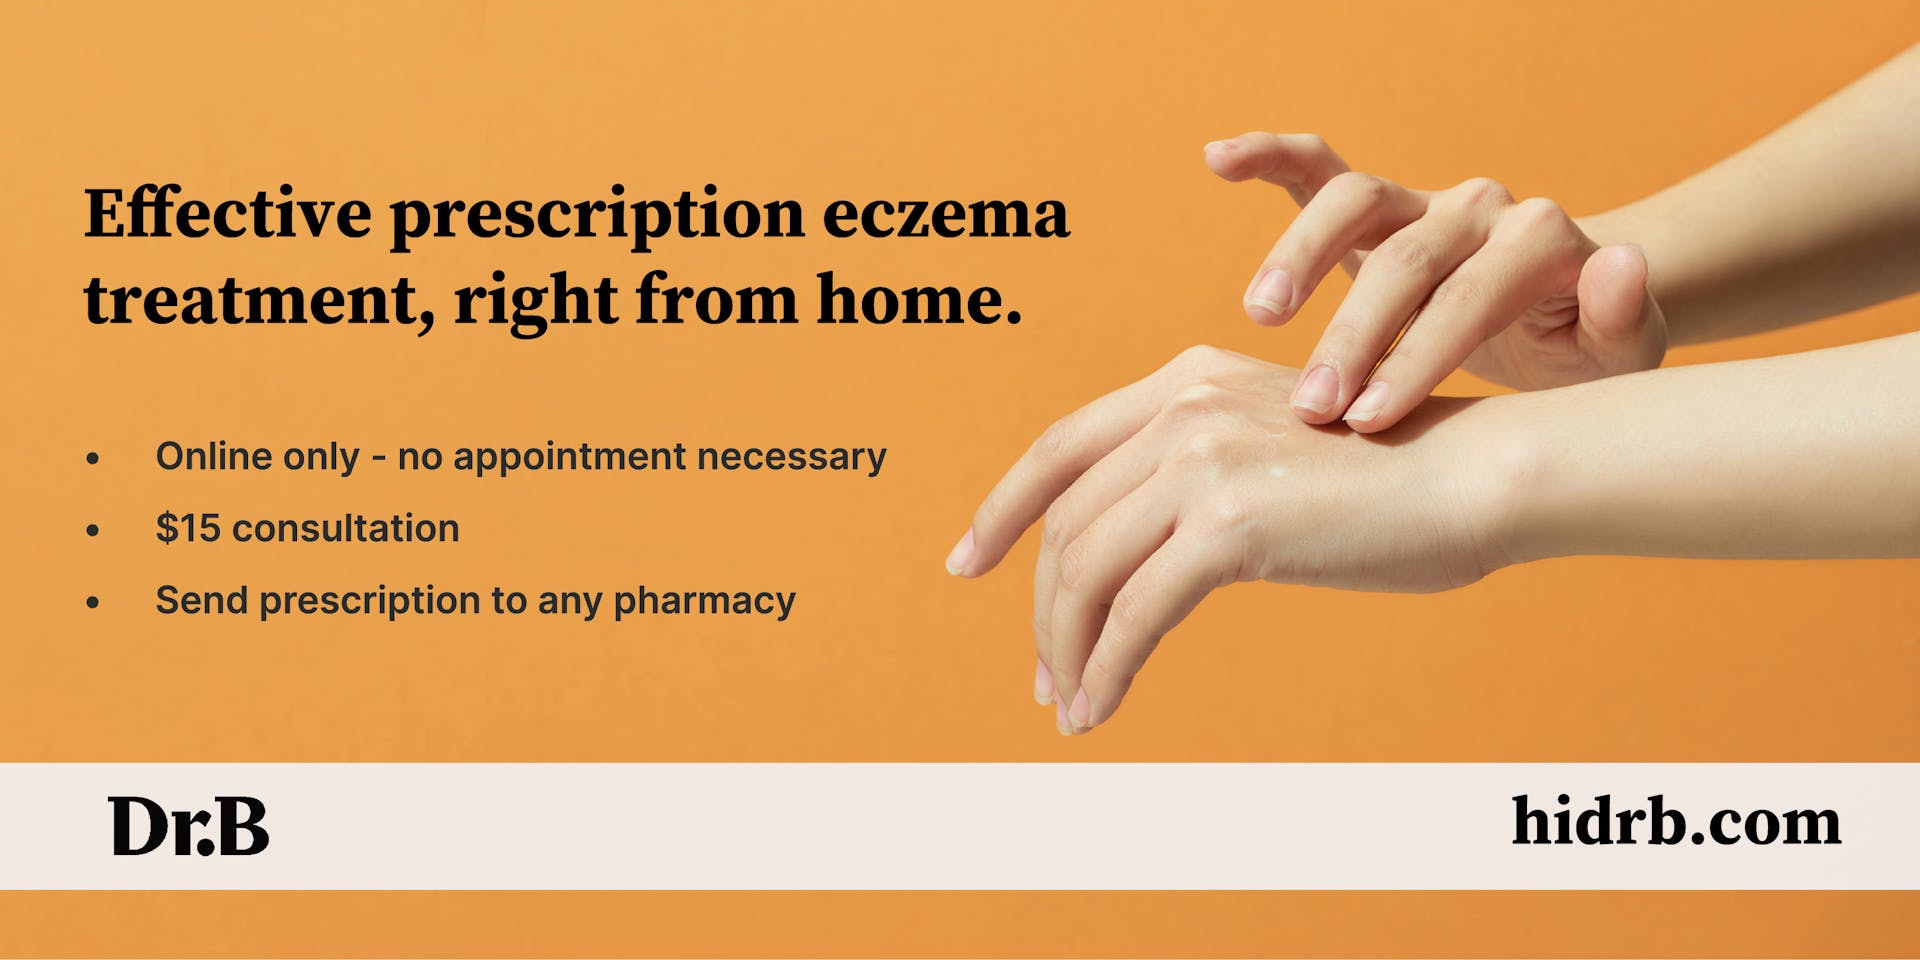 Banner advertising Dr. B's services for eczema treatments